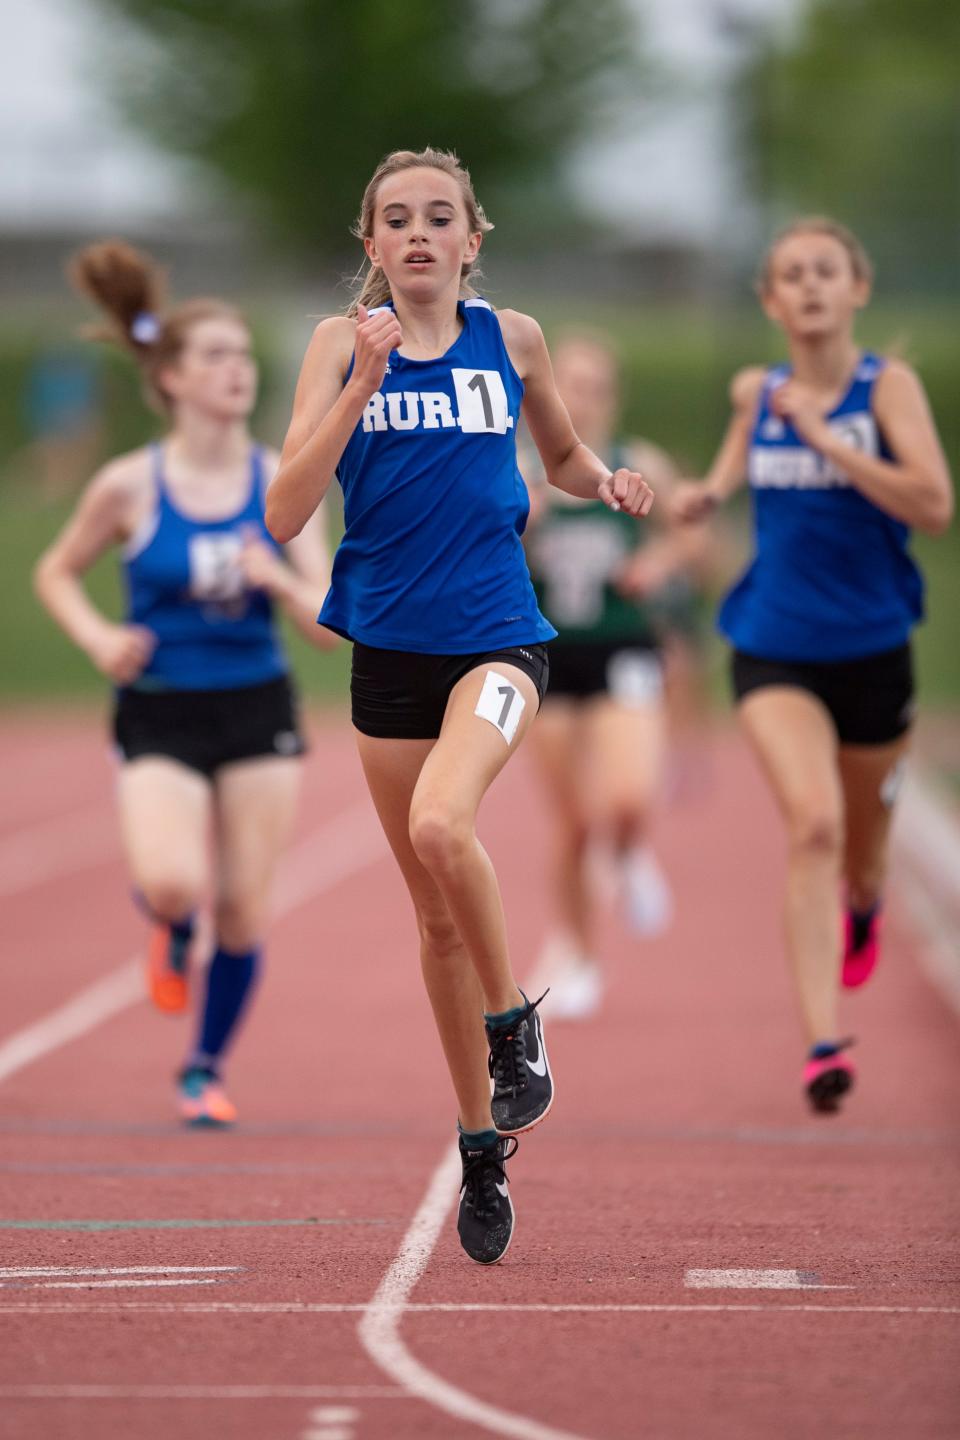 Washburn Rural's Payton Fink (1) crosses the finish line while competing in the girls 3200 meter during 6A regionals Thursday at Hummer Sports Park.